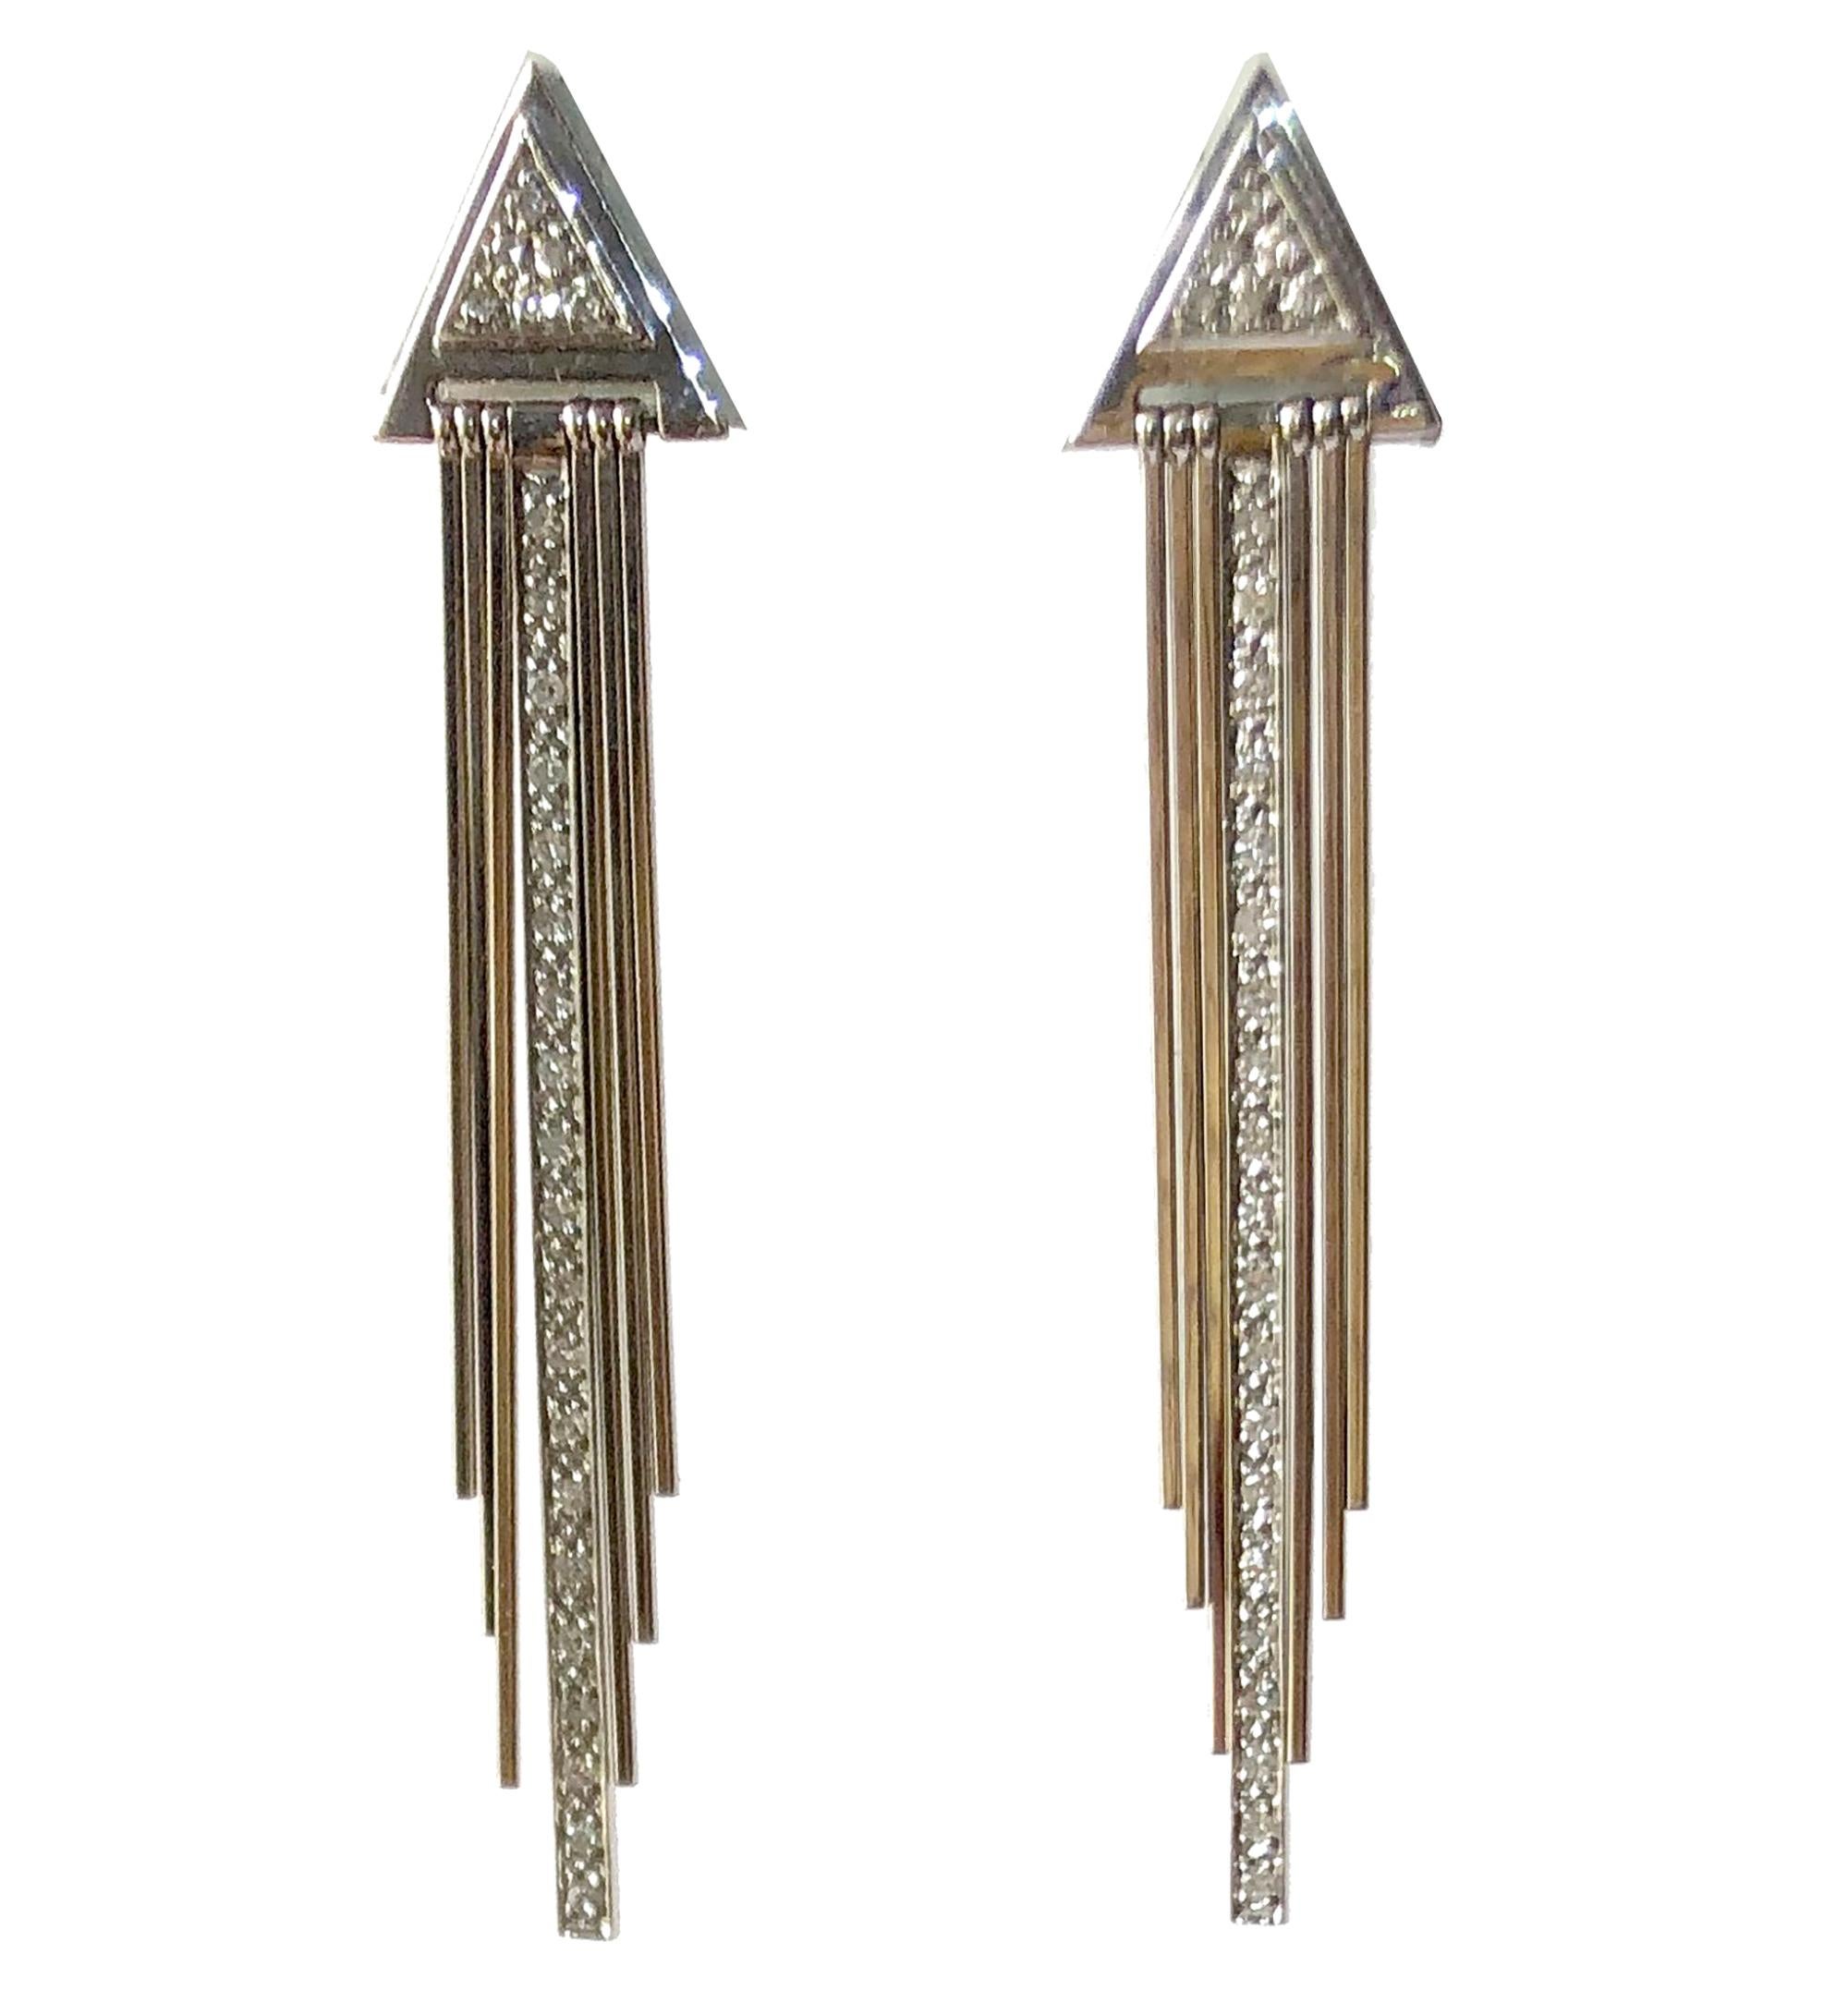 Pair of 14K white gold and diamond fringed 1970's / 1980's Deco revival earrings.  Earrings have a total of seven kinetic fringe, including a strand of diamonds seen center.  Pierced earrings measure 2 3/8